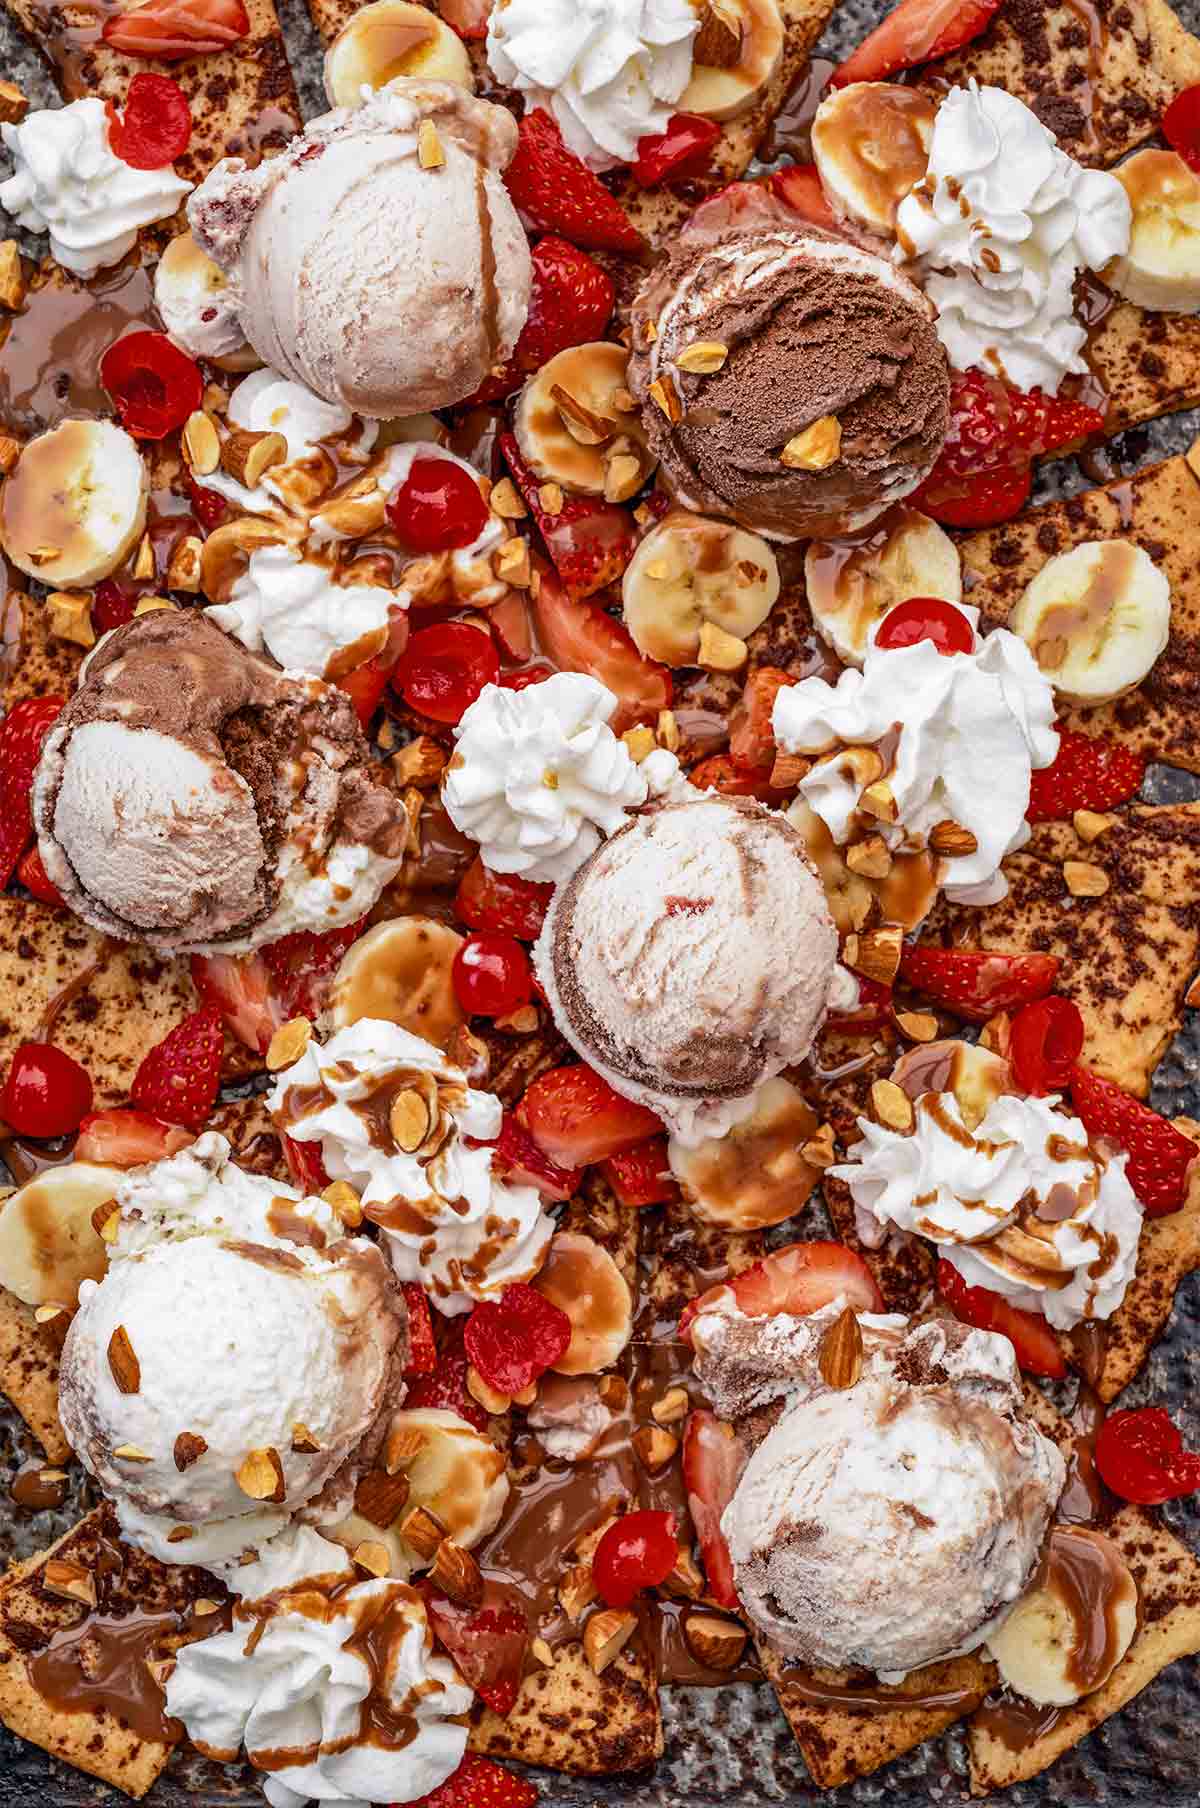 Banana split nachos on a large baking sheet, garnished with almonds, cherries, and chocolate sauce.